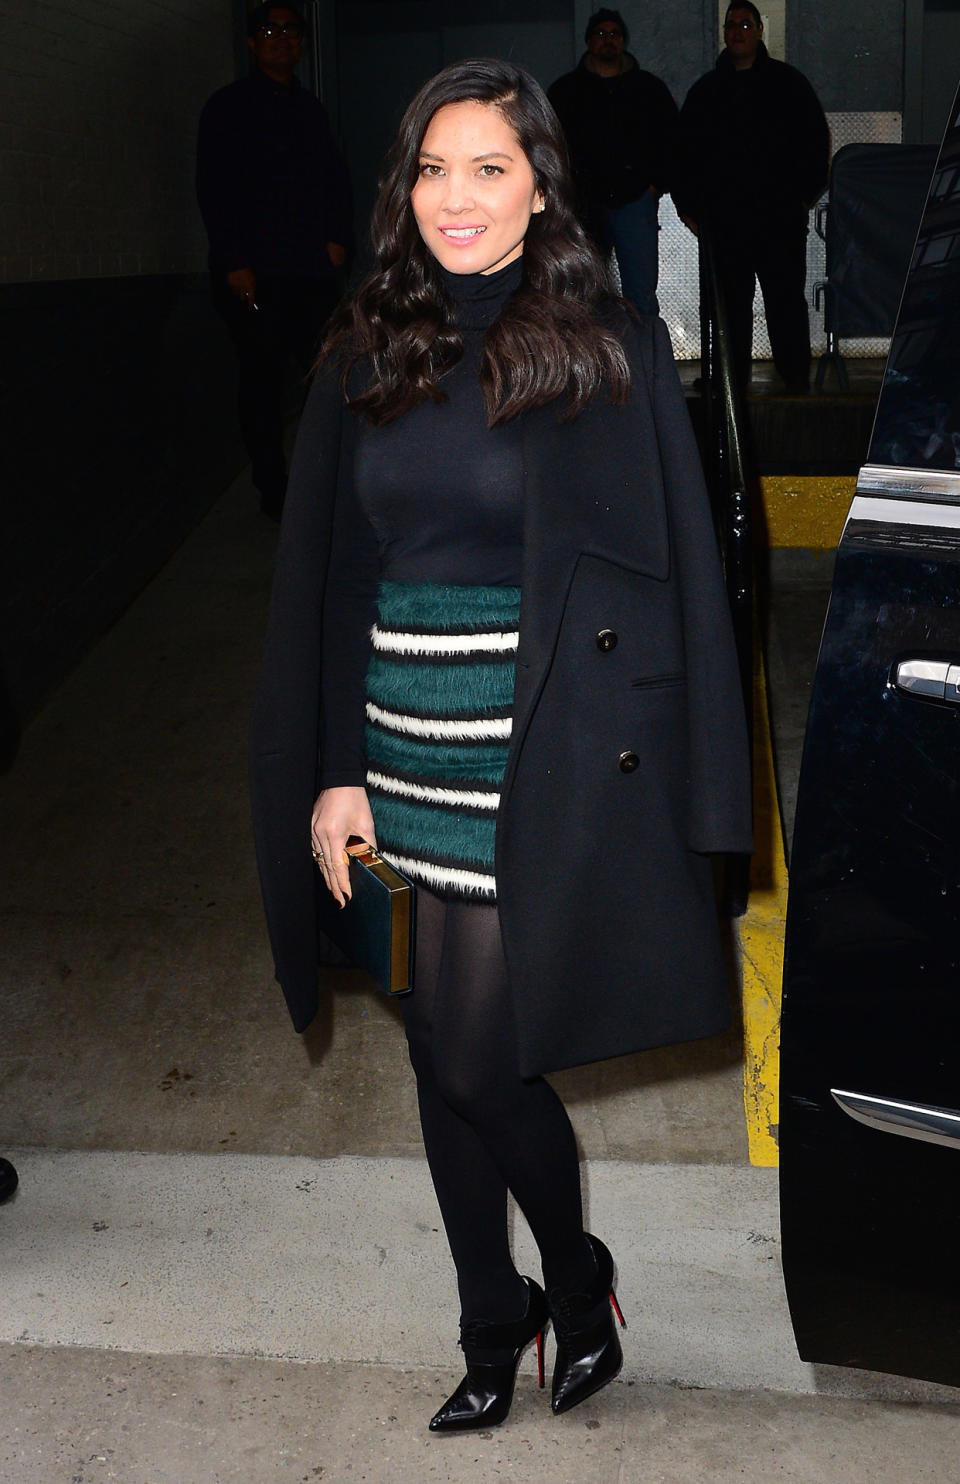 Olivia Munn In All Black with a Striped Skirt in New York City